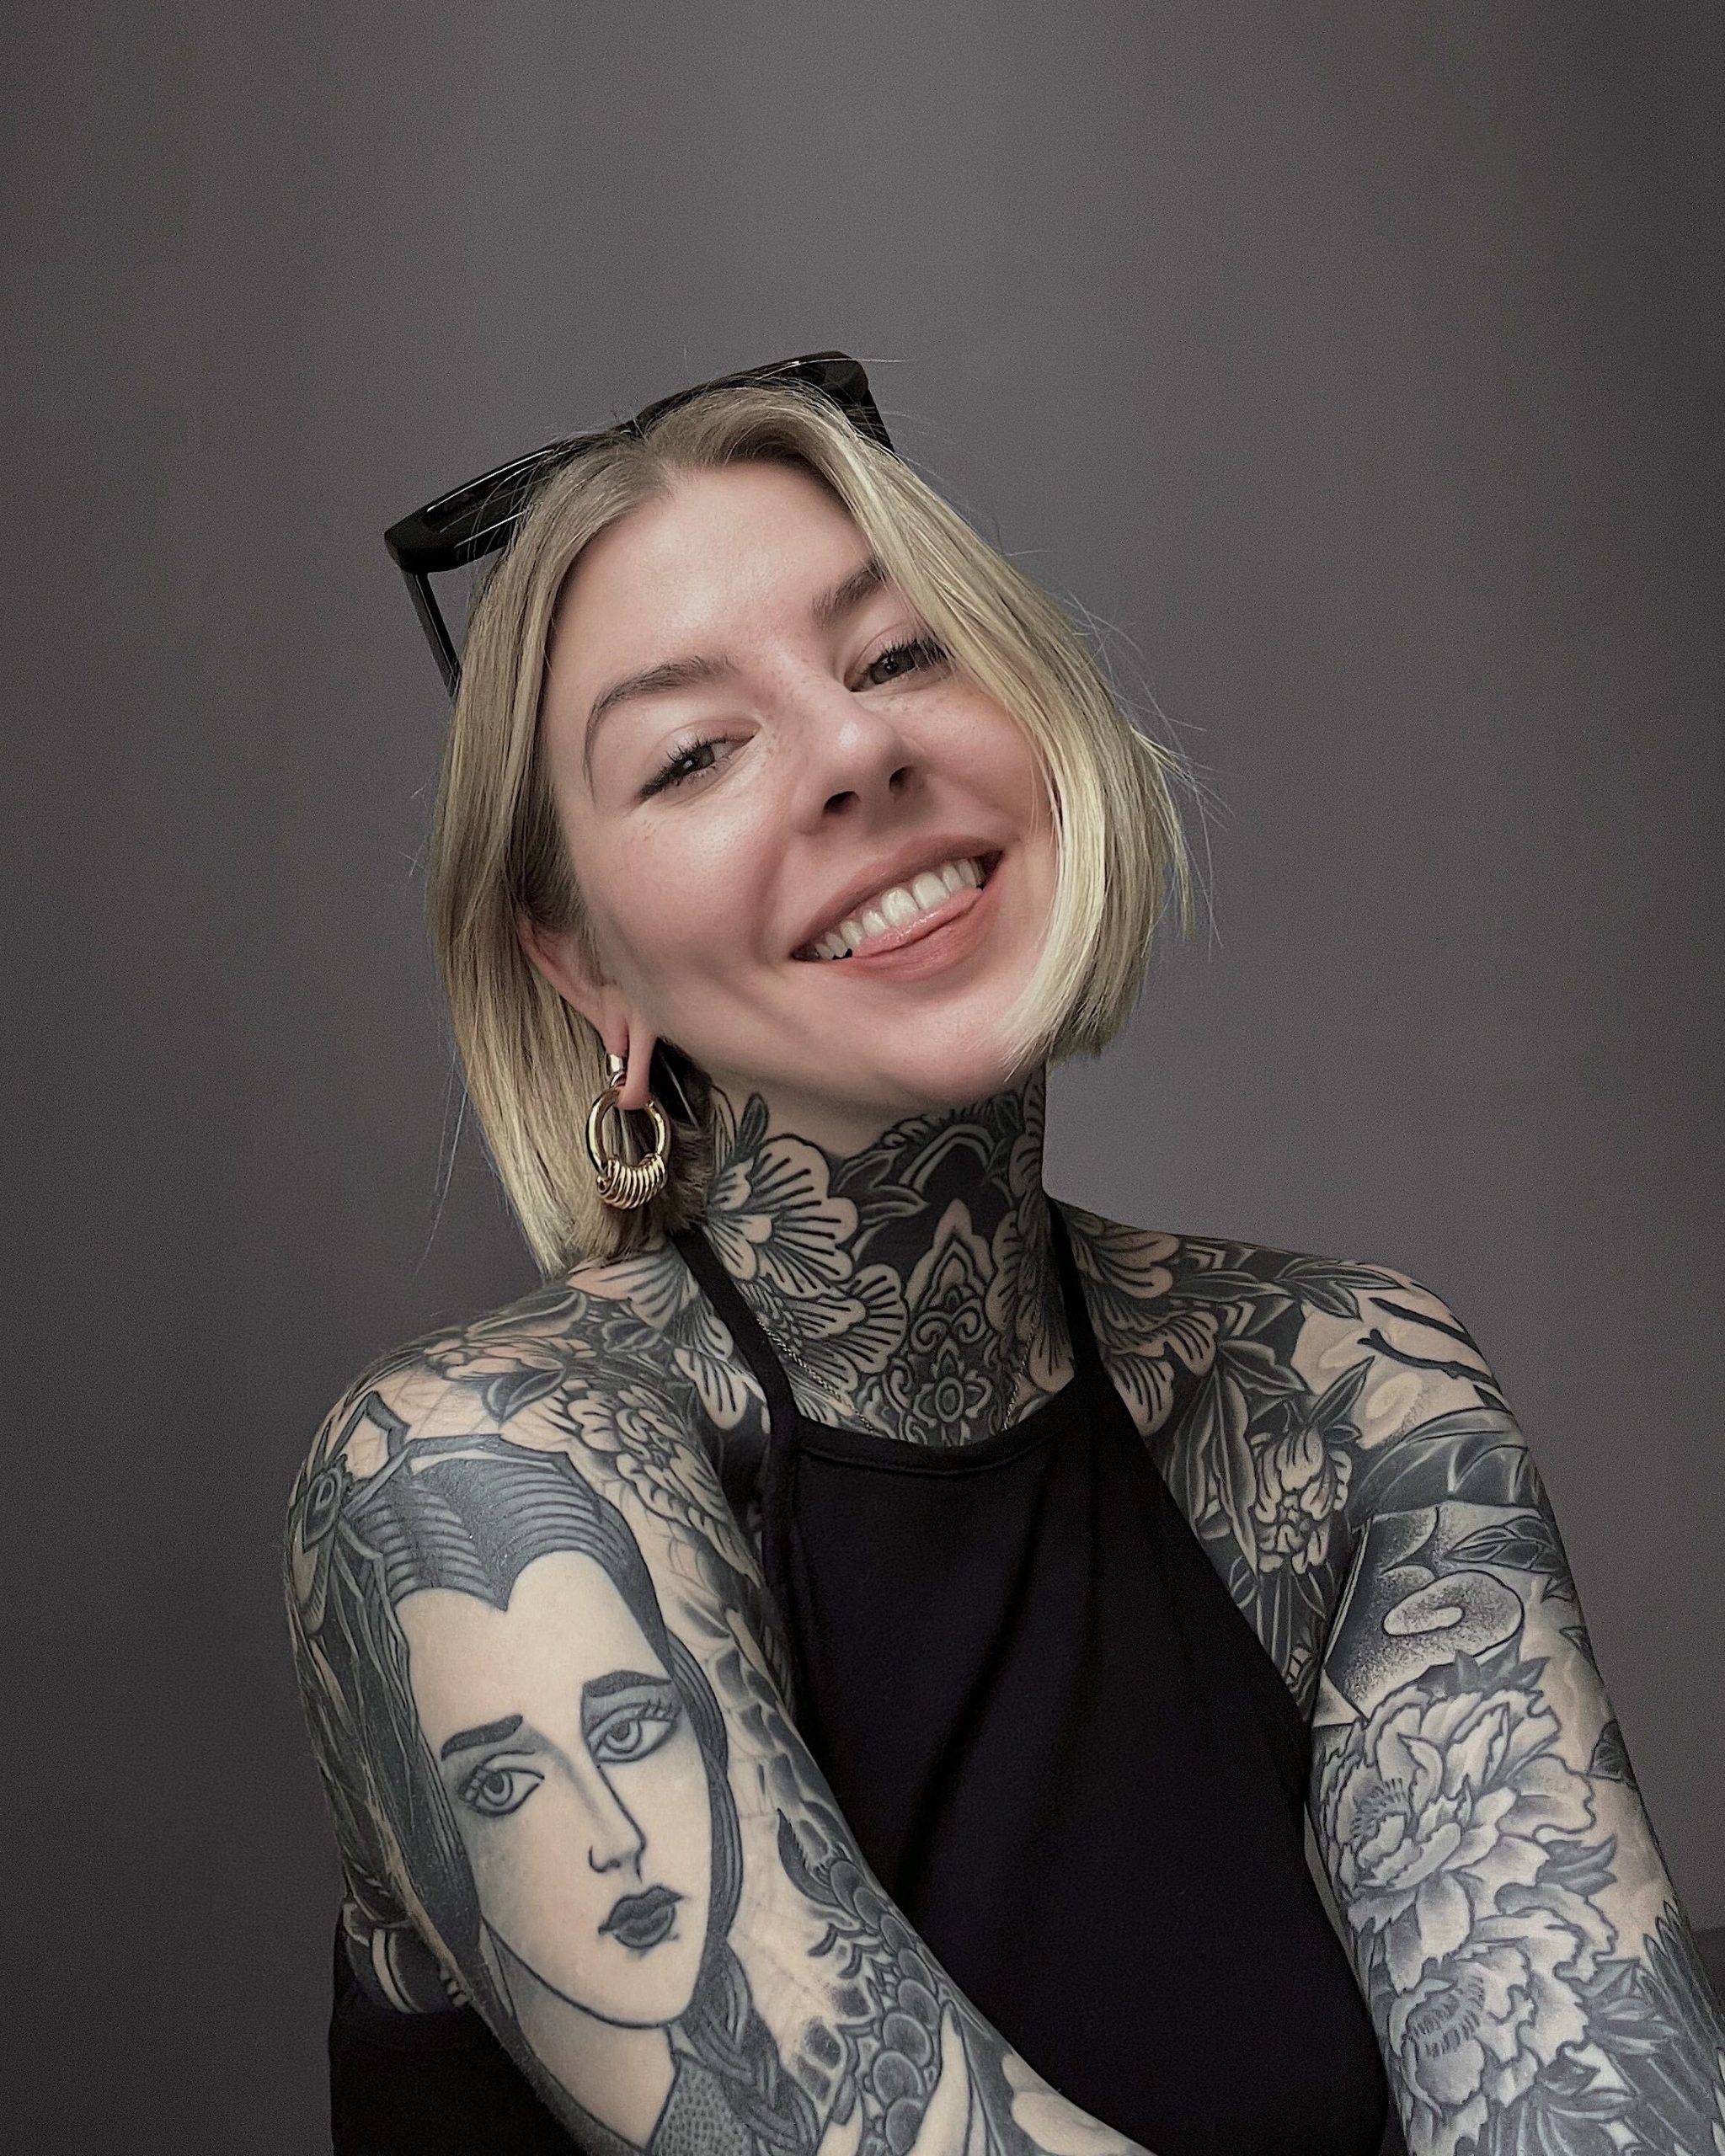 Her tattoo world: Stories & Ink's Barbara Crane on her tattoo collection  and new tattoo healing – Things&Ink